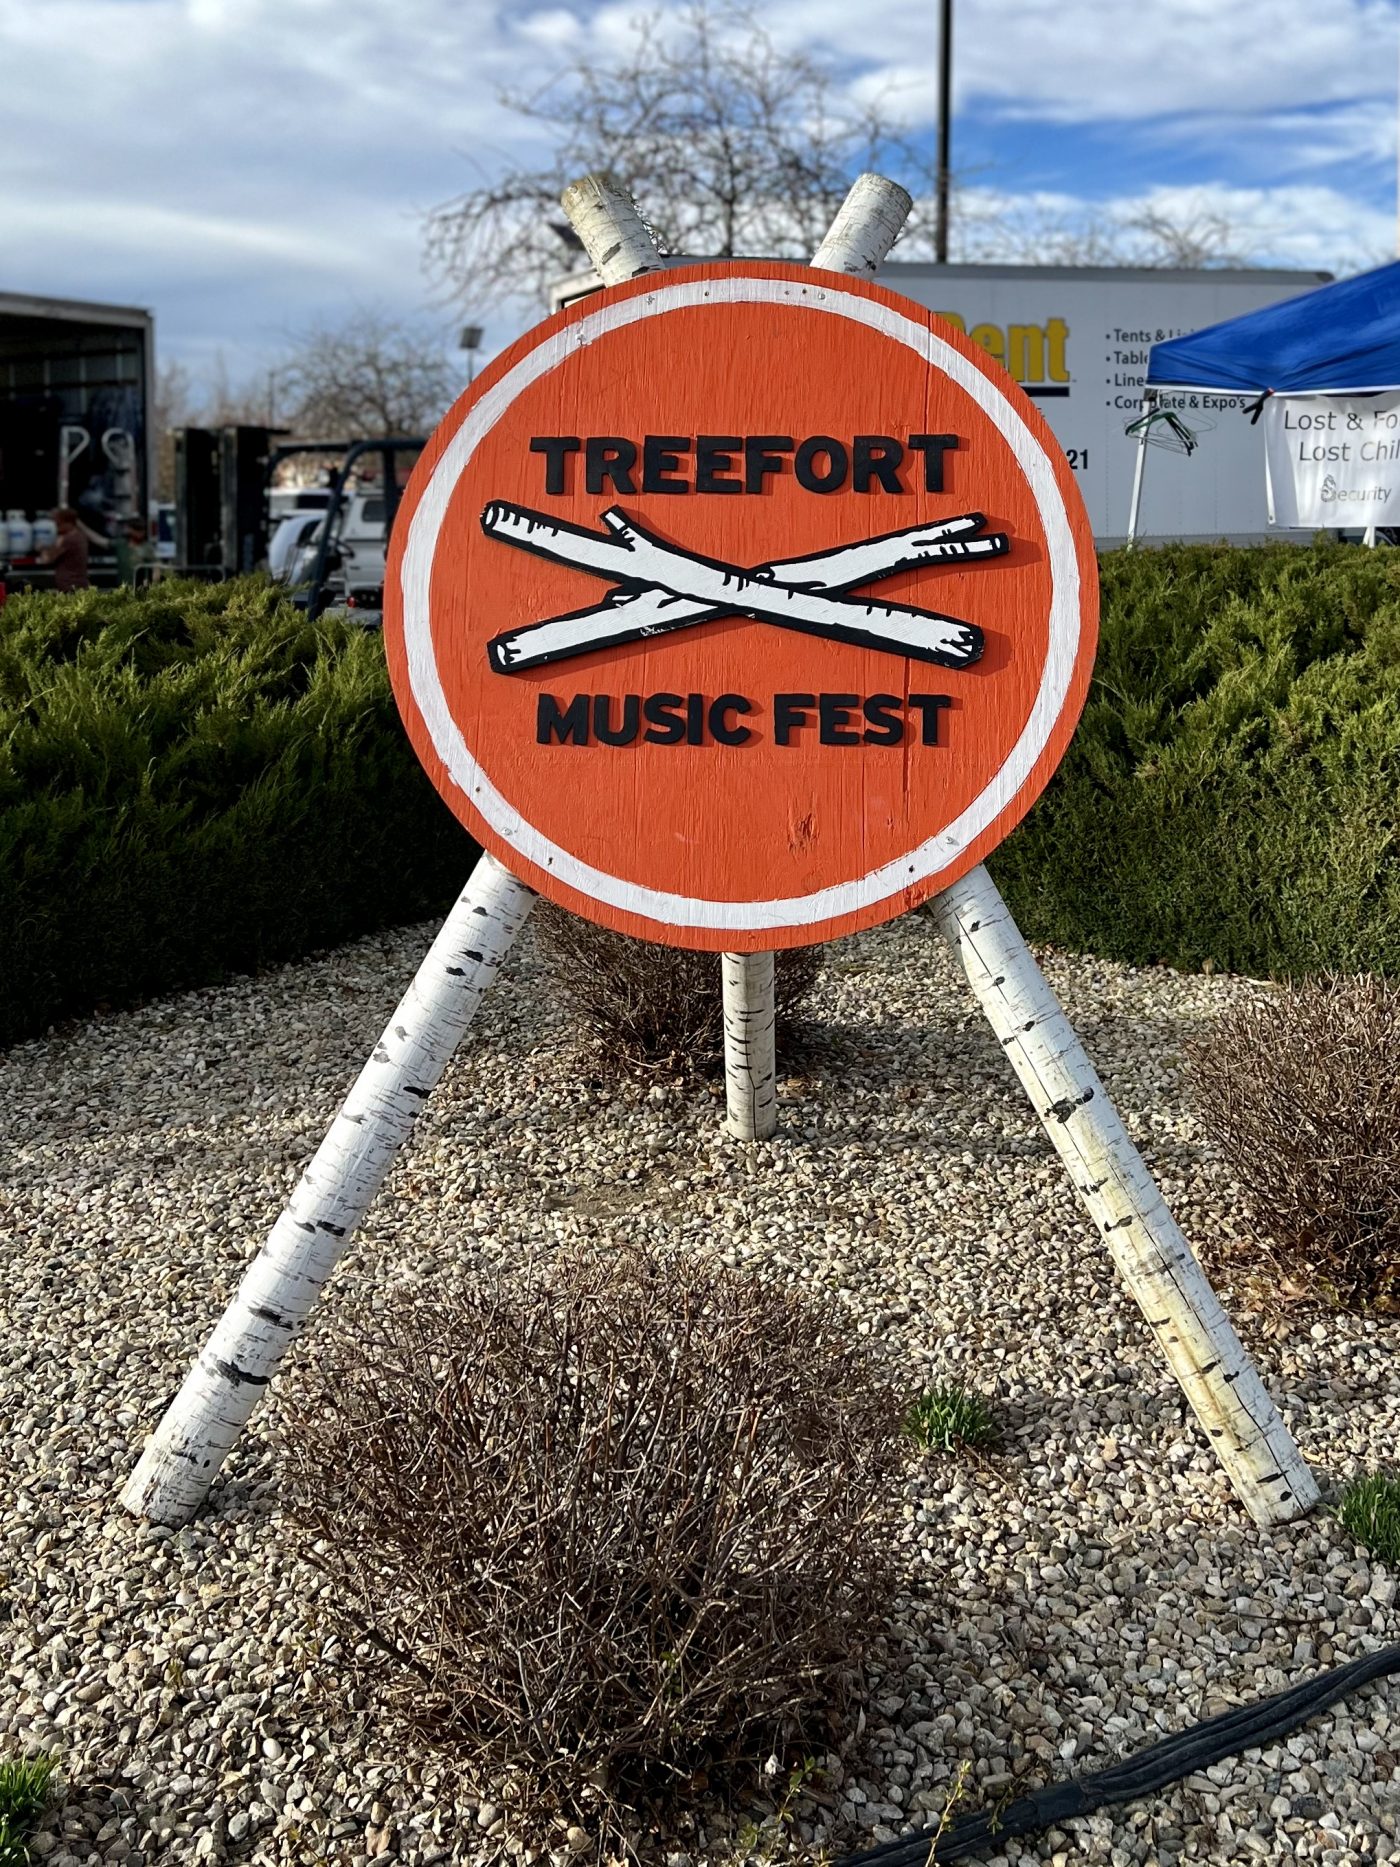 Treefort Music Festival brings fans of live music to Boise, Idaho during the month of March.